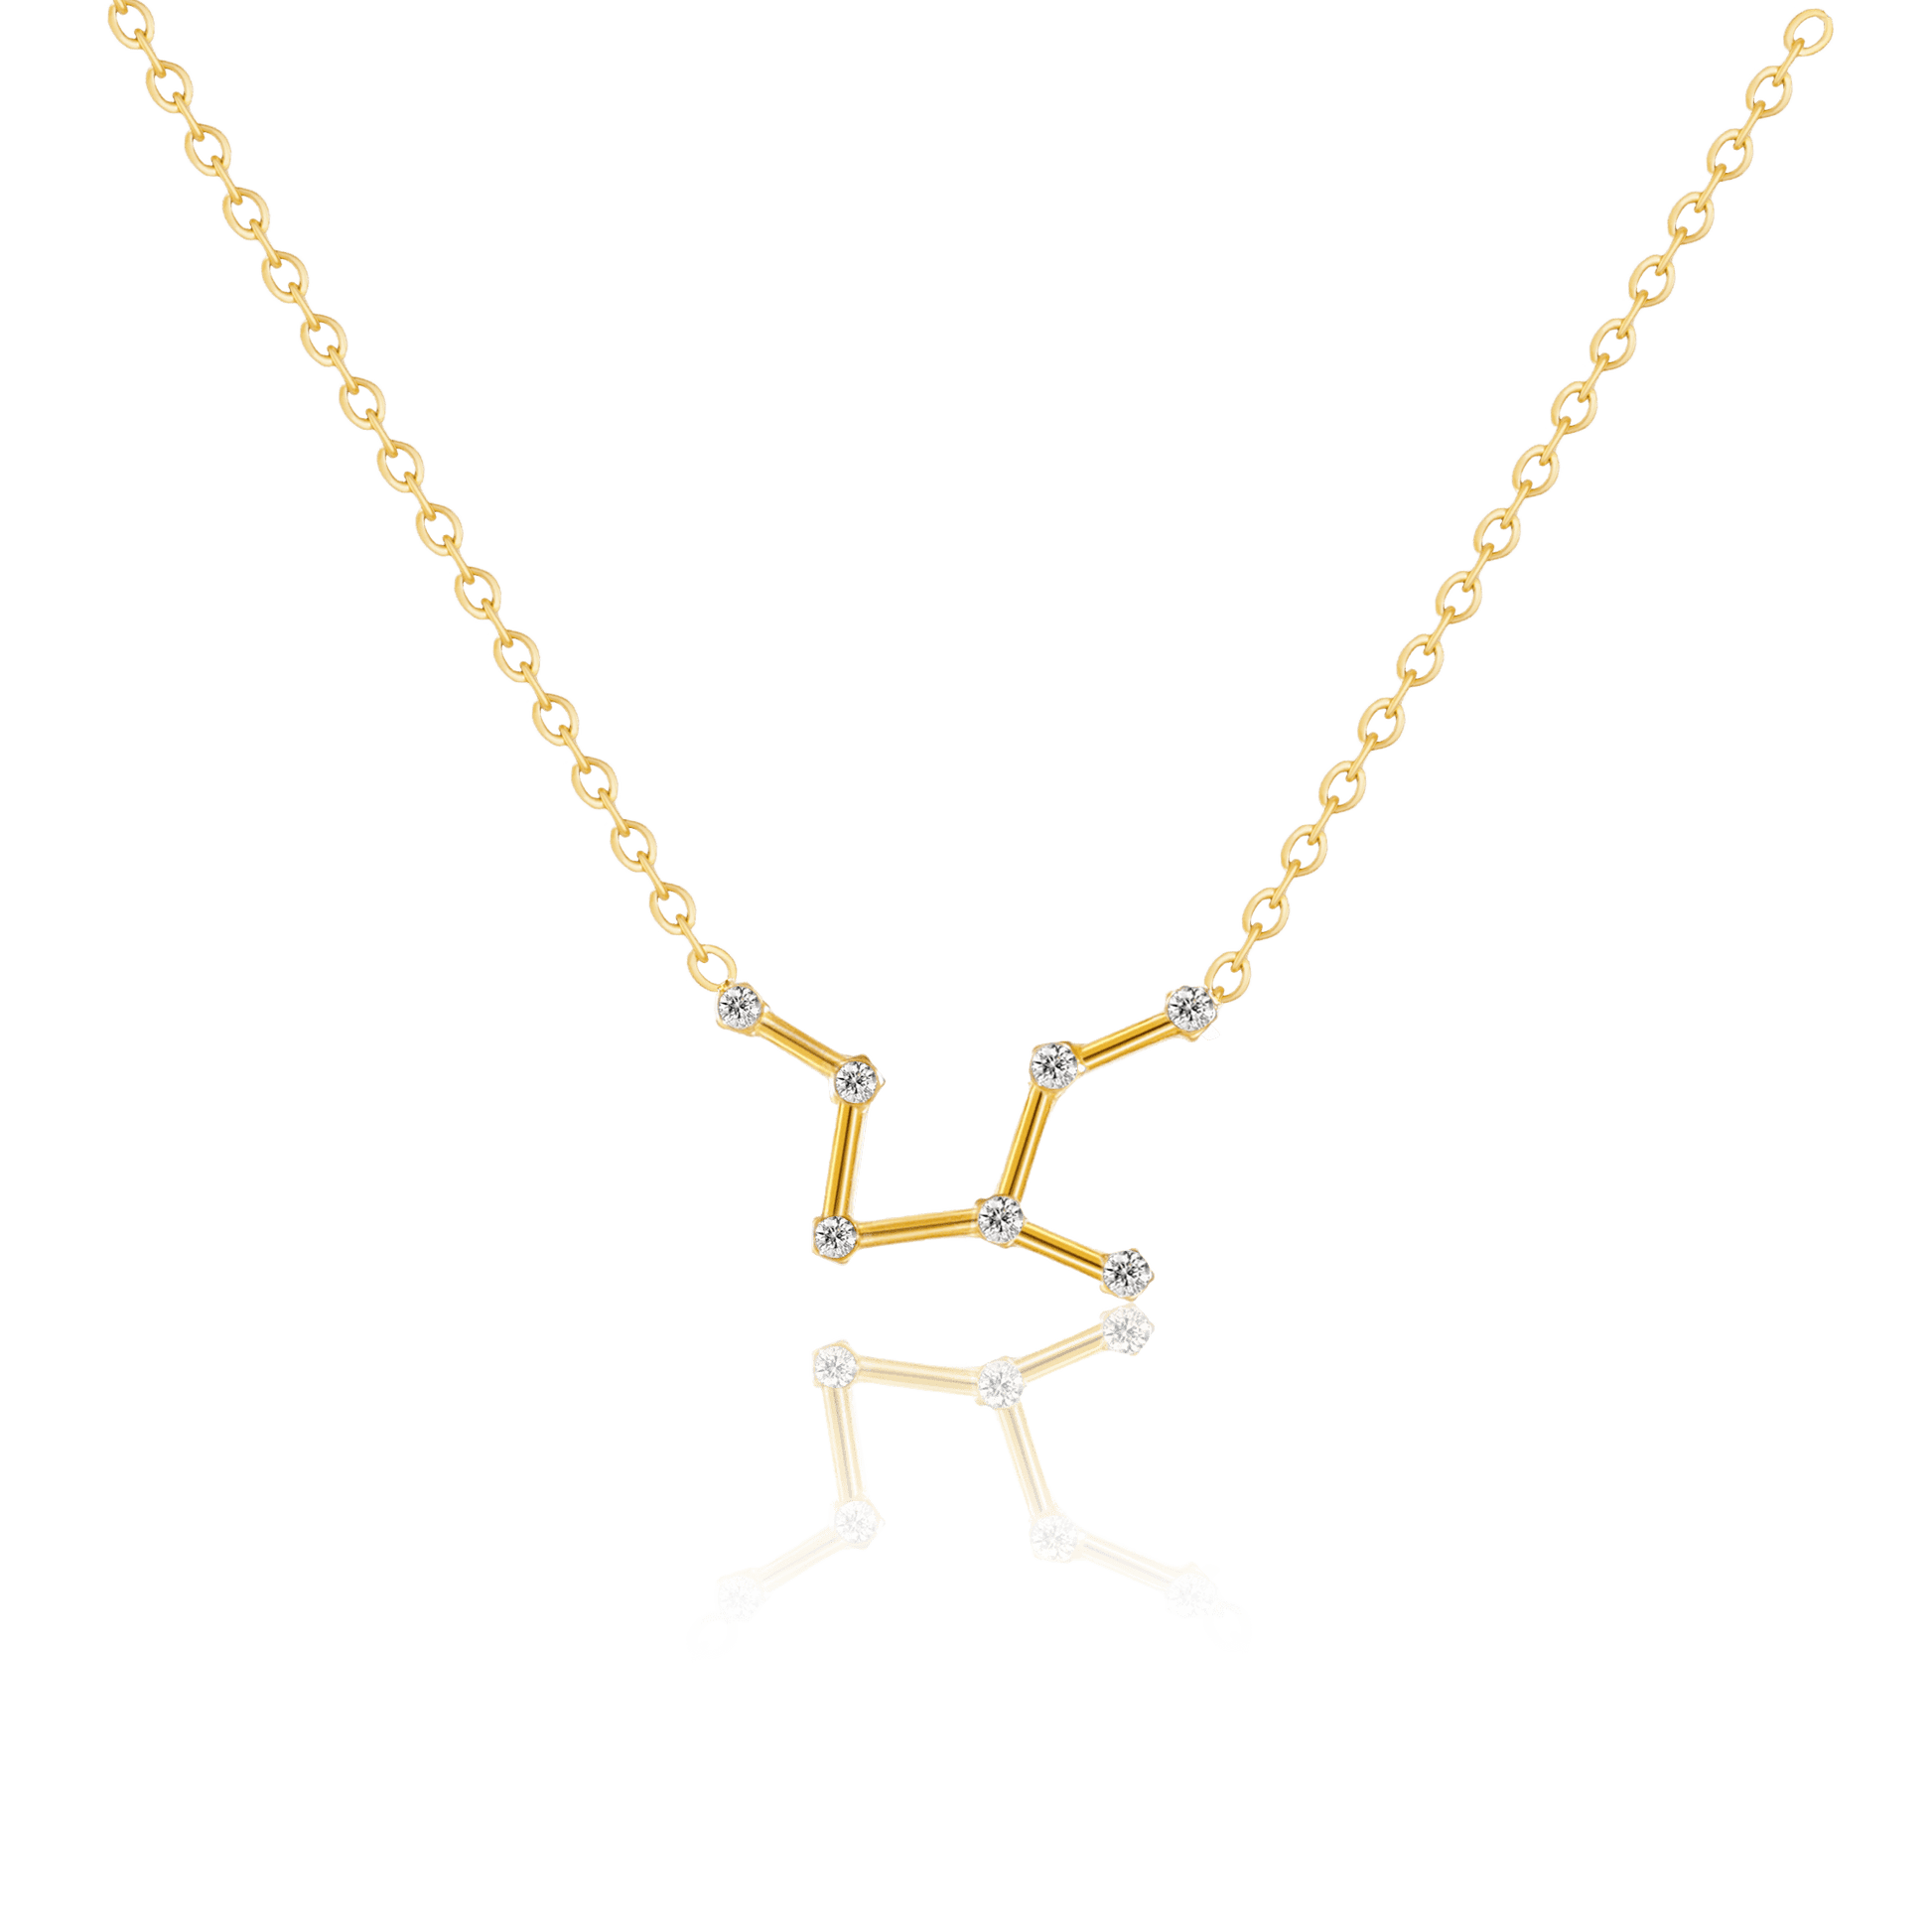 bianco rosso Necklaces Virgo Zircon Gold Necklace cyprus greece jewelry gift free shipping europe worldwide